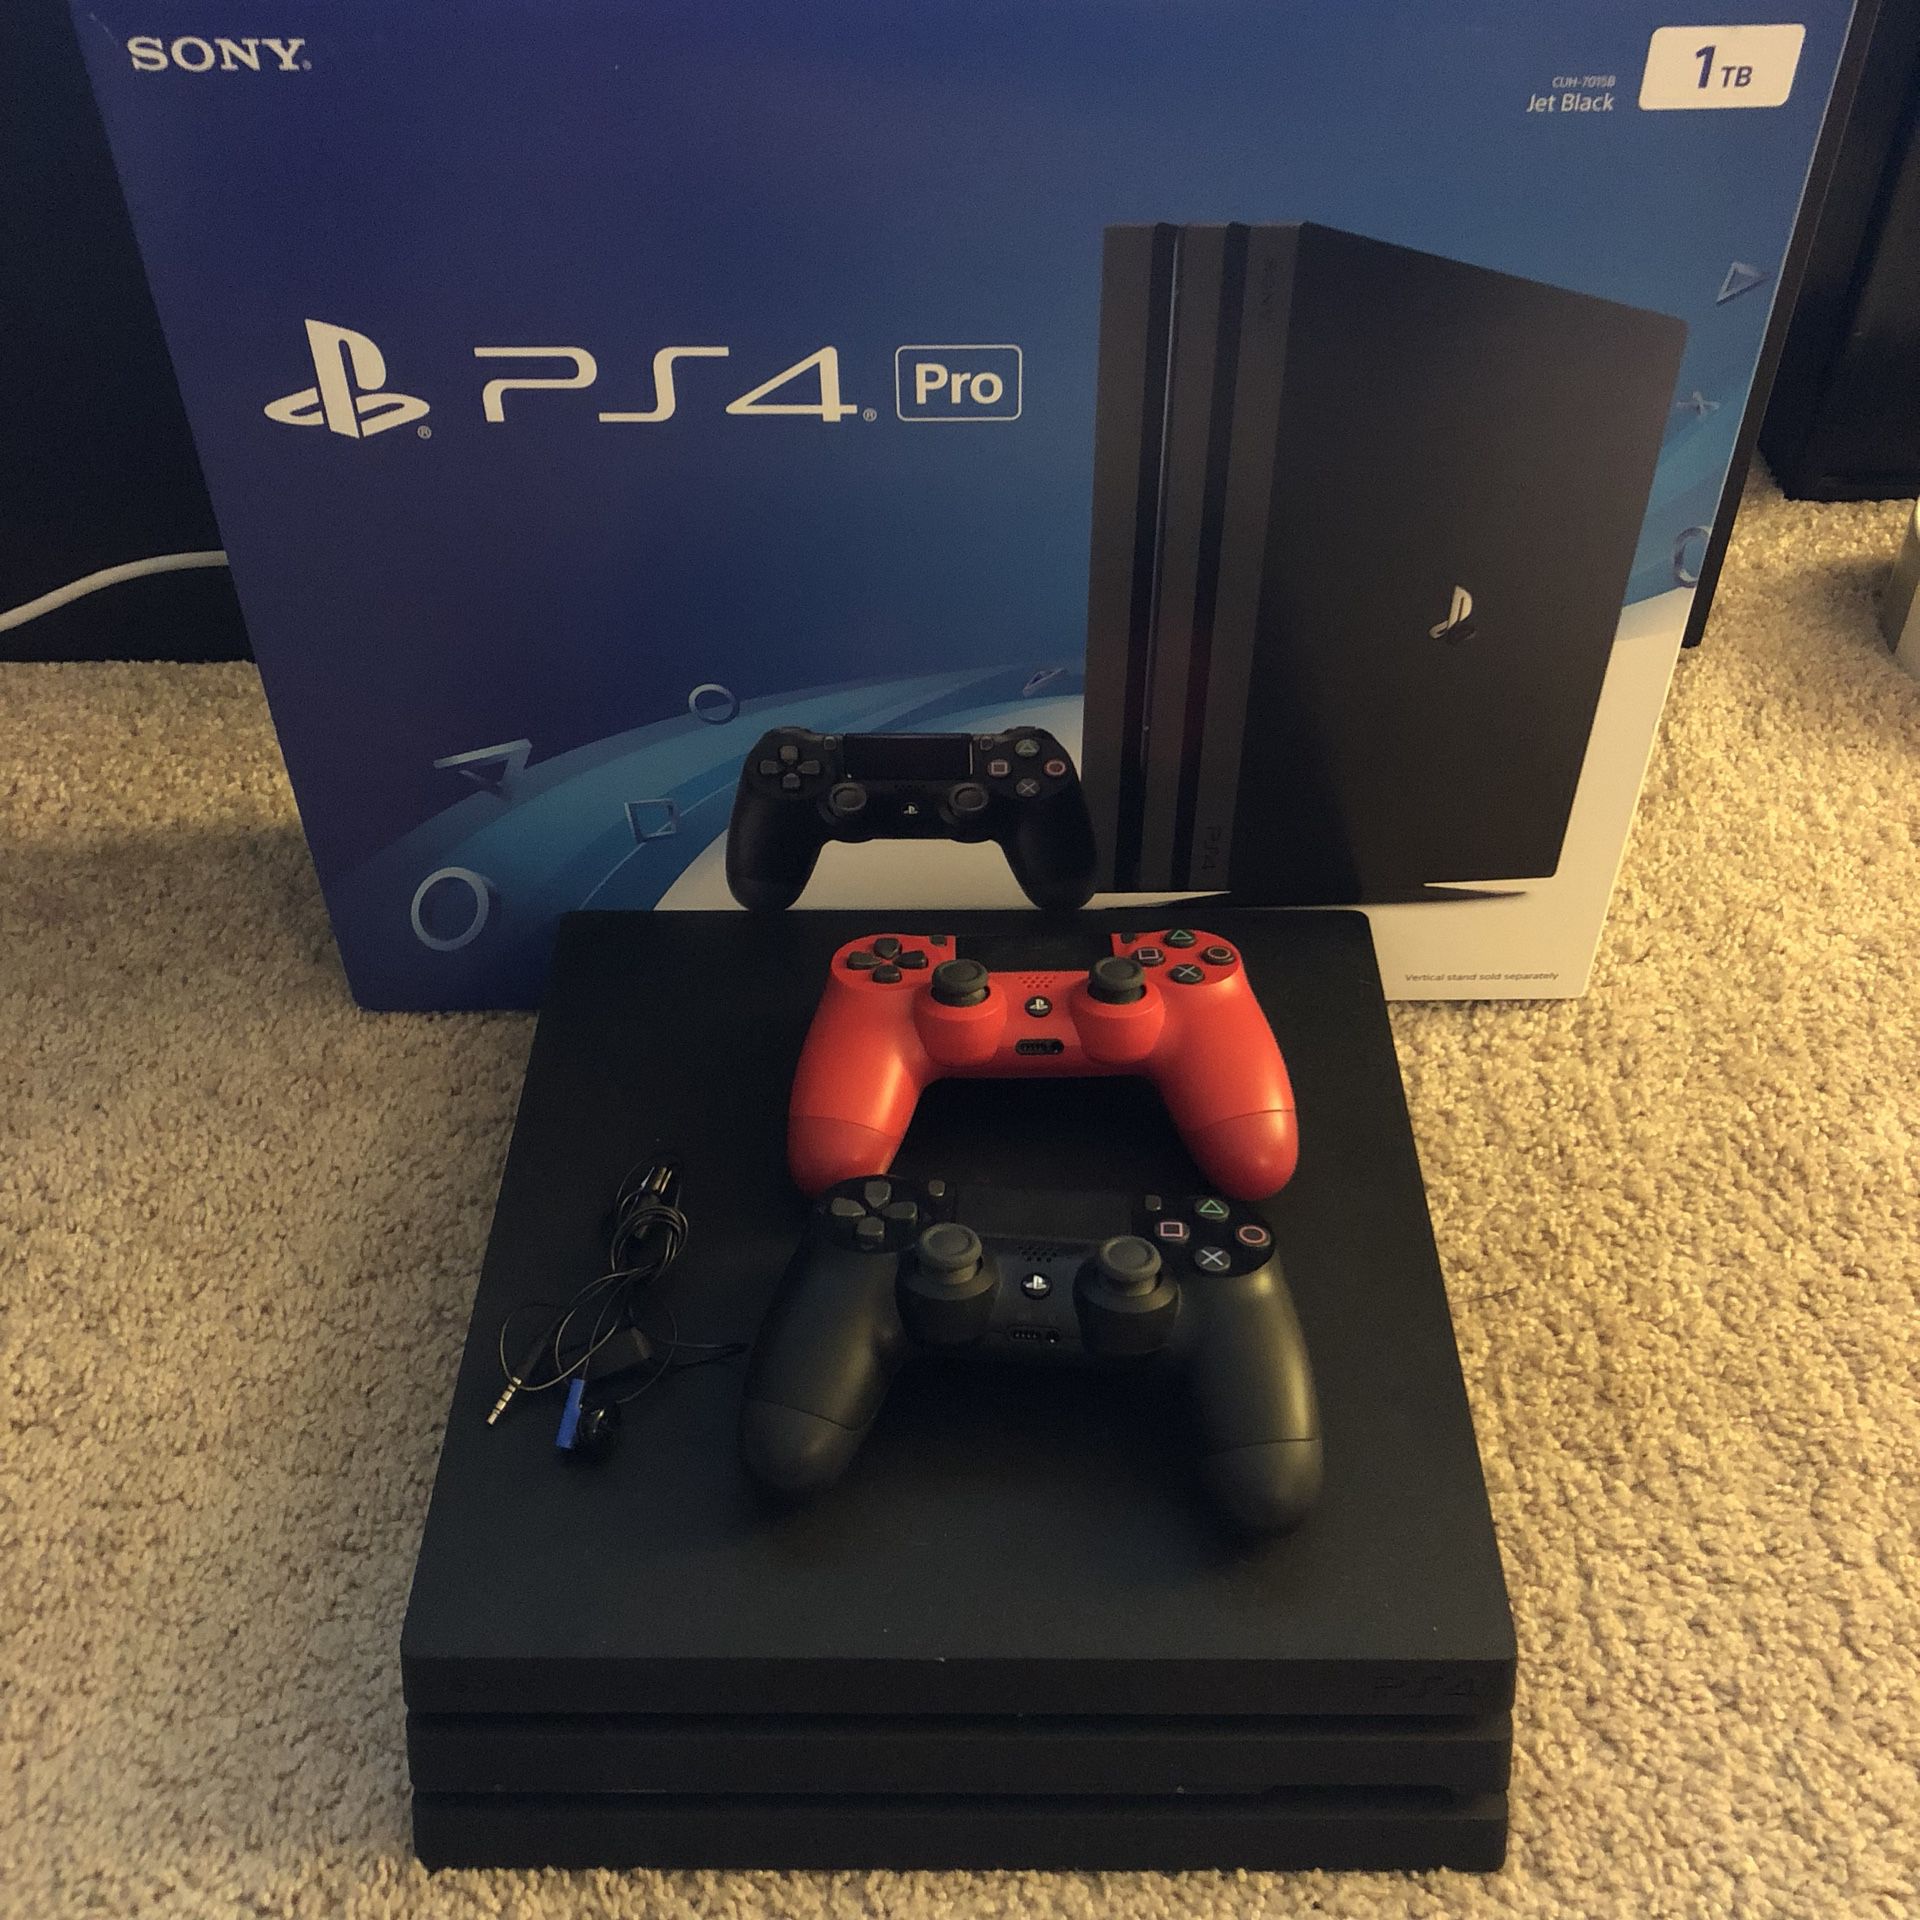 Sony Playstation 4 Pro (FIFA18 package deal)